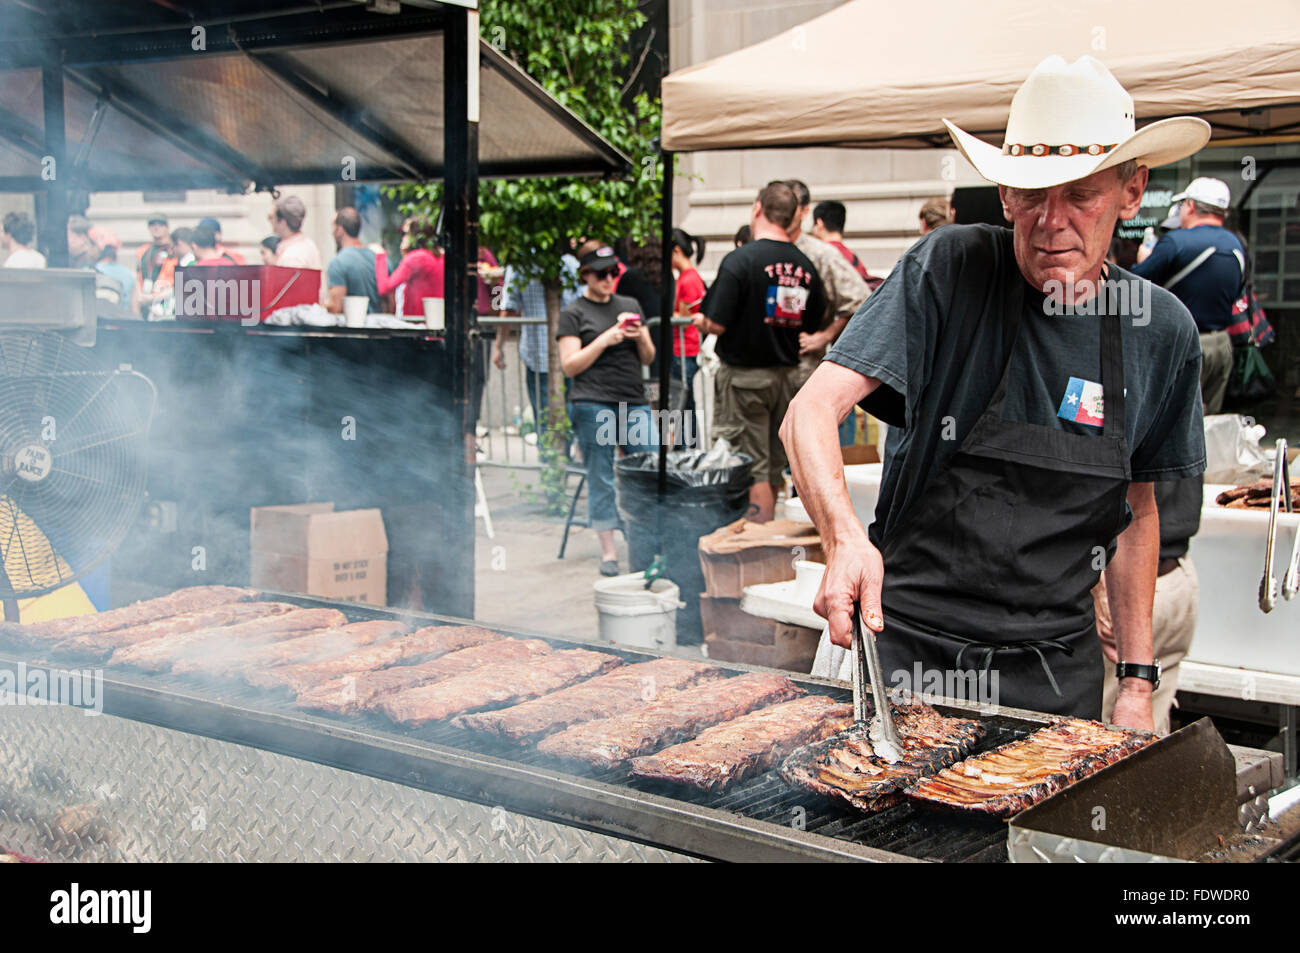 Bakers Ribs at 2011 Big Apple BBQ in New York city. Stock Photo